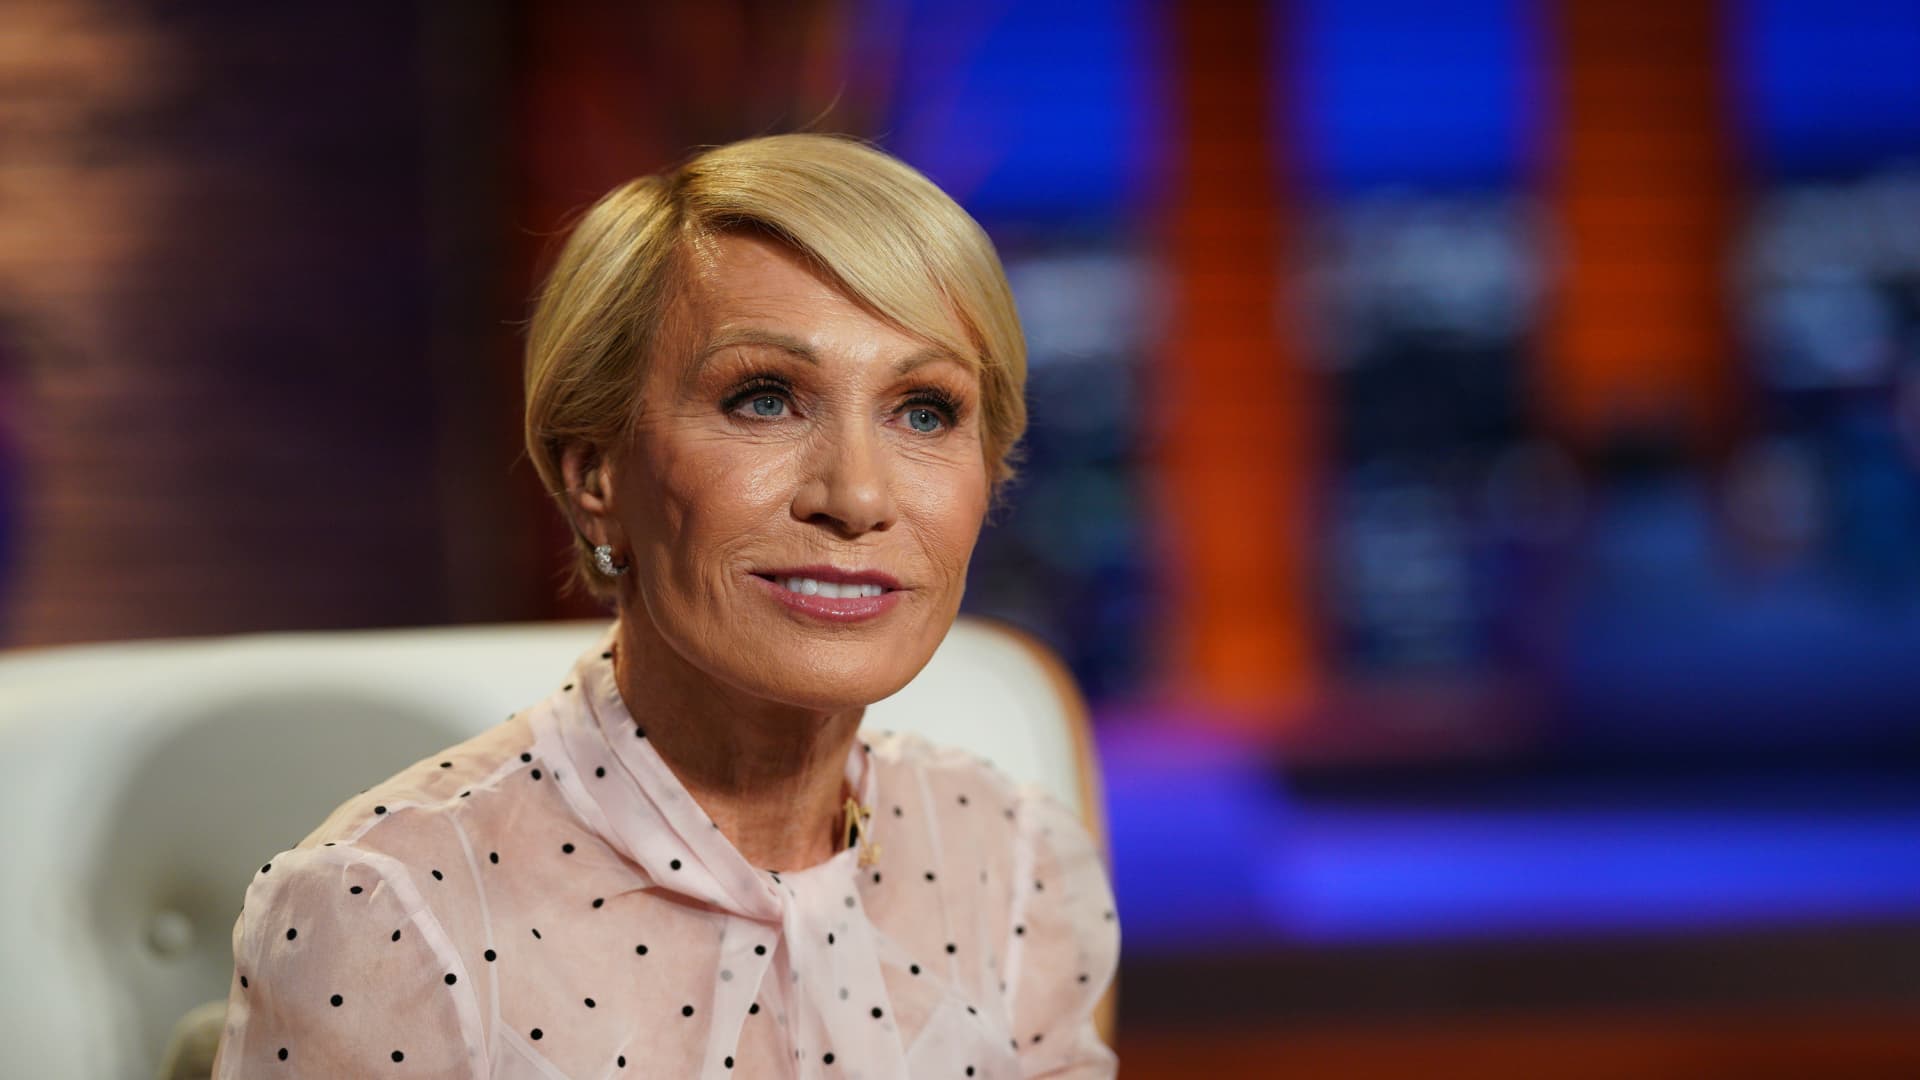 Barbara Corcoran says she made $1 million in a day selling apartments nobody wanted: I 'created a buying frenzy’